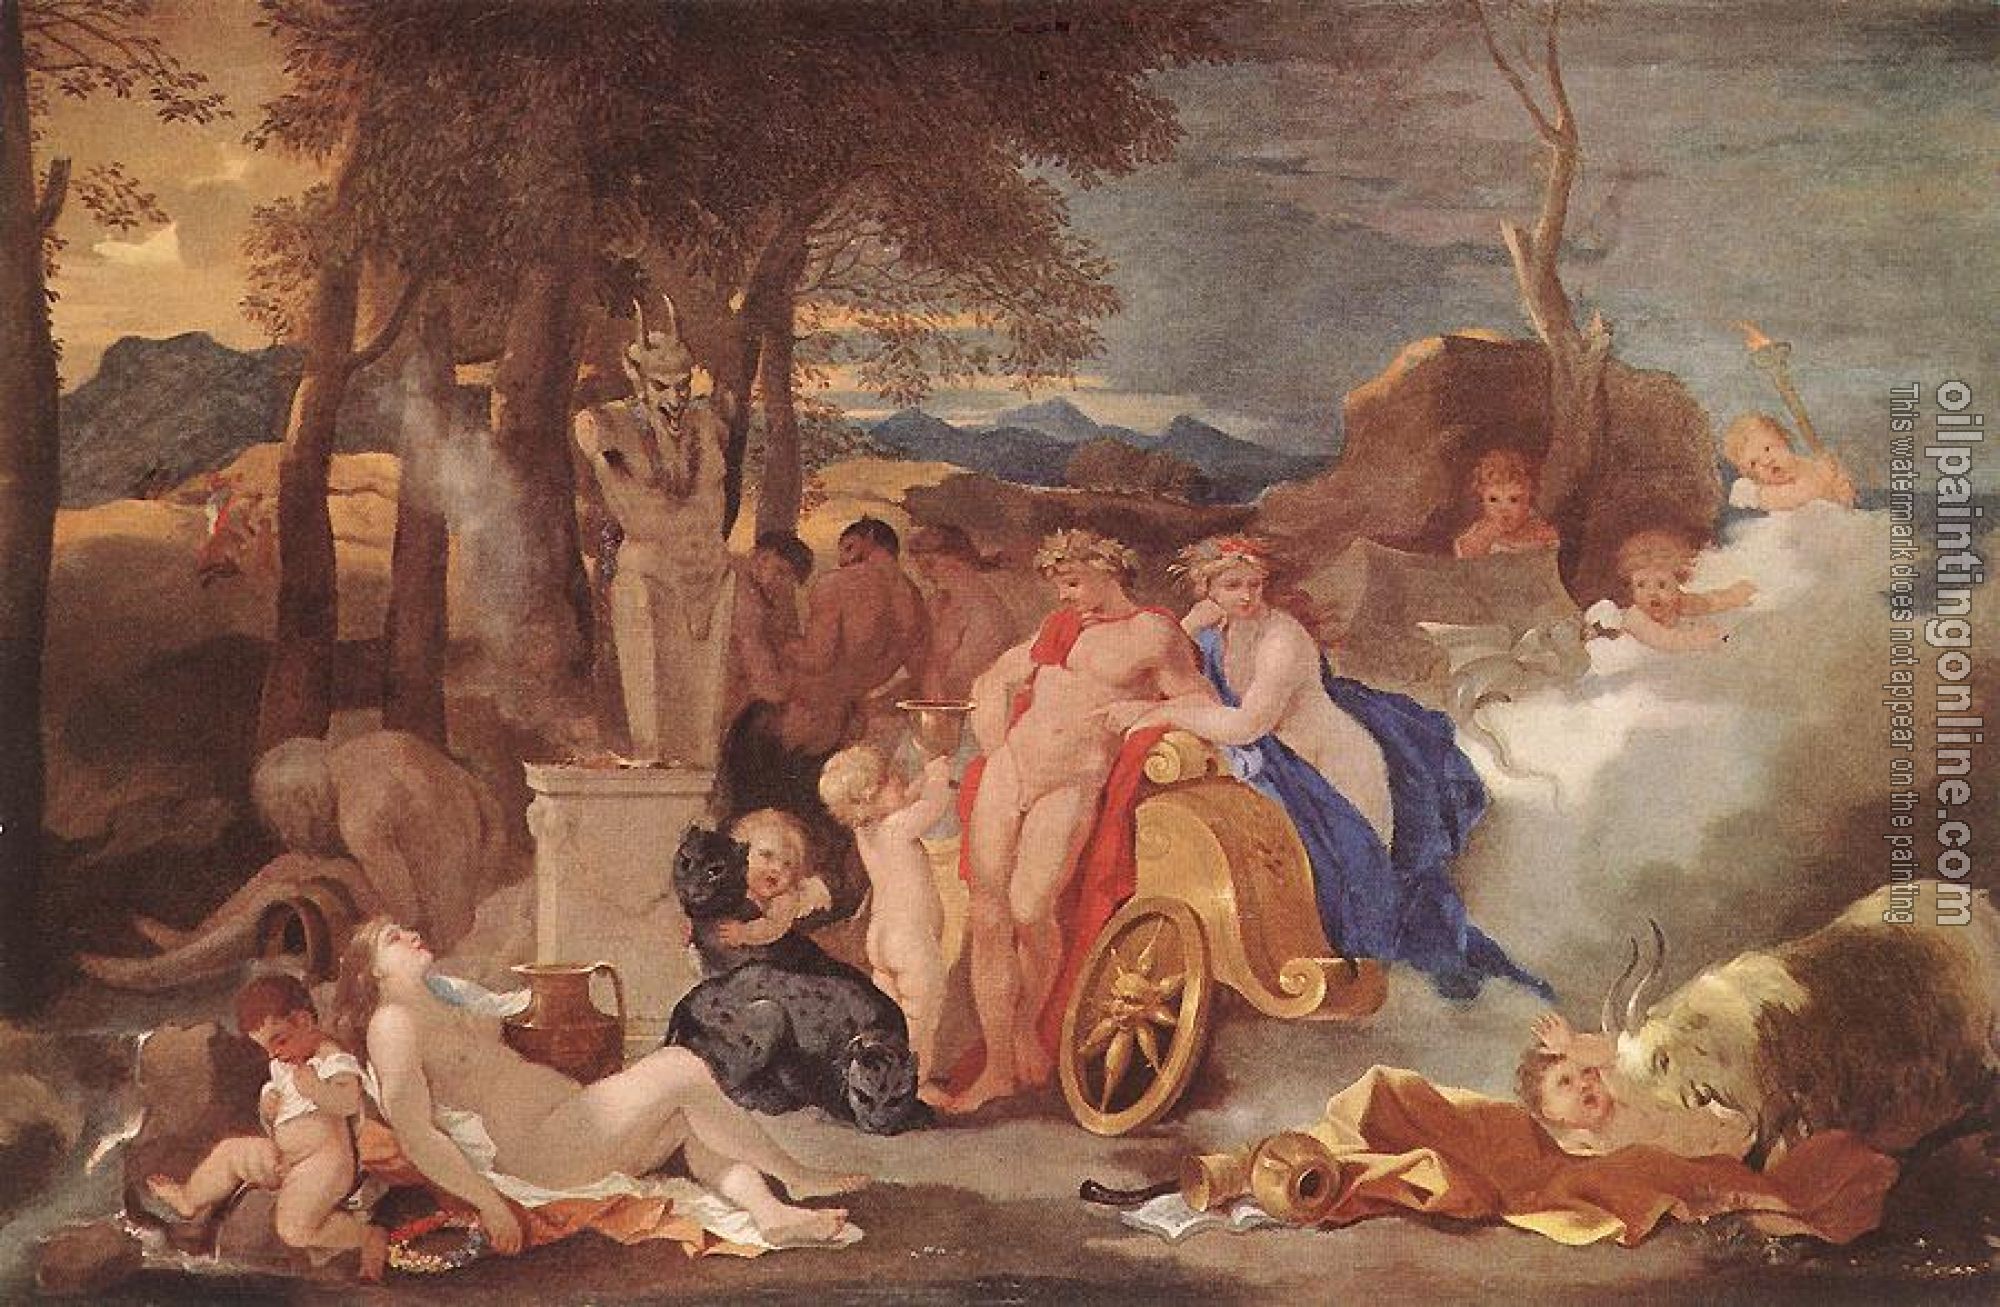 Bourdon, Sebastien - Bacchus and Ceres with Nymphs and Satyrs